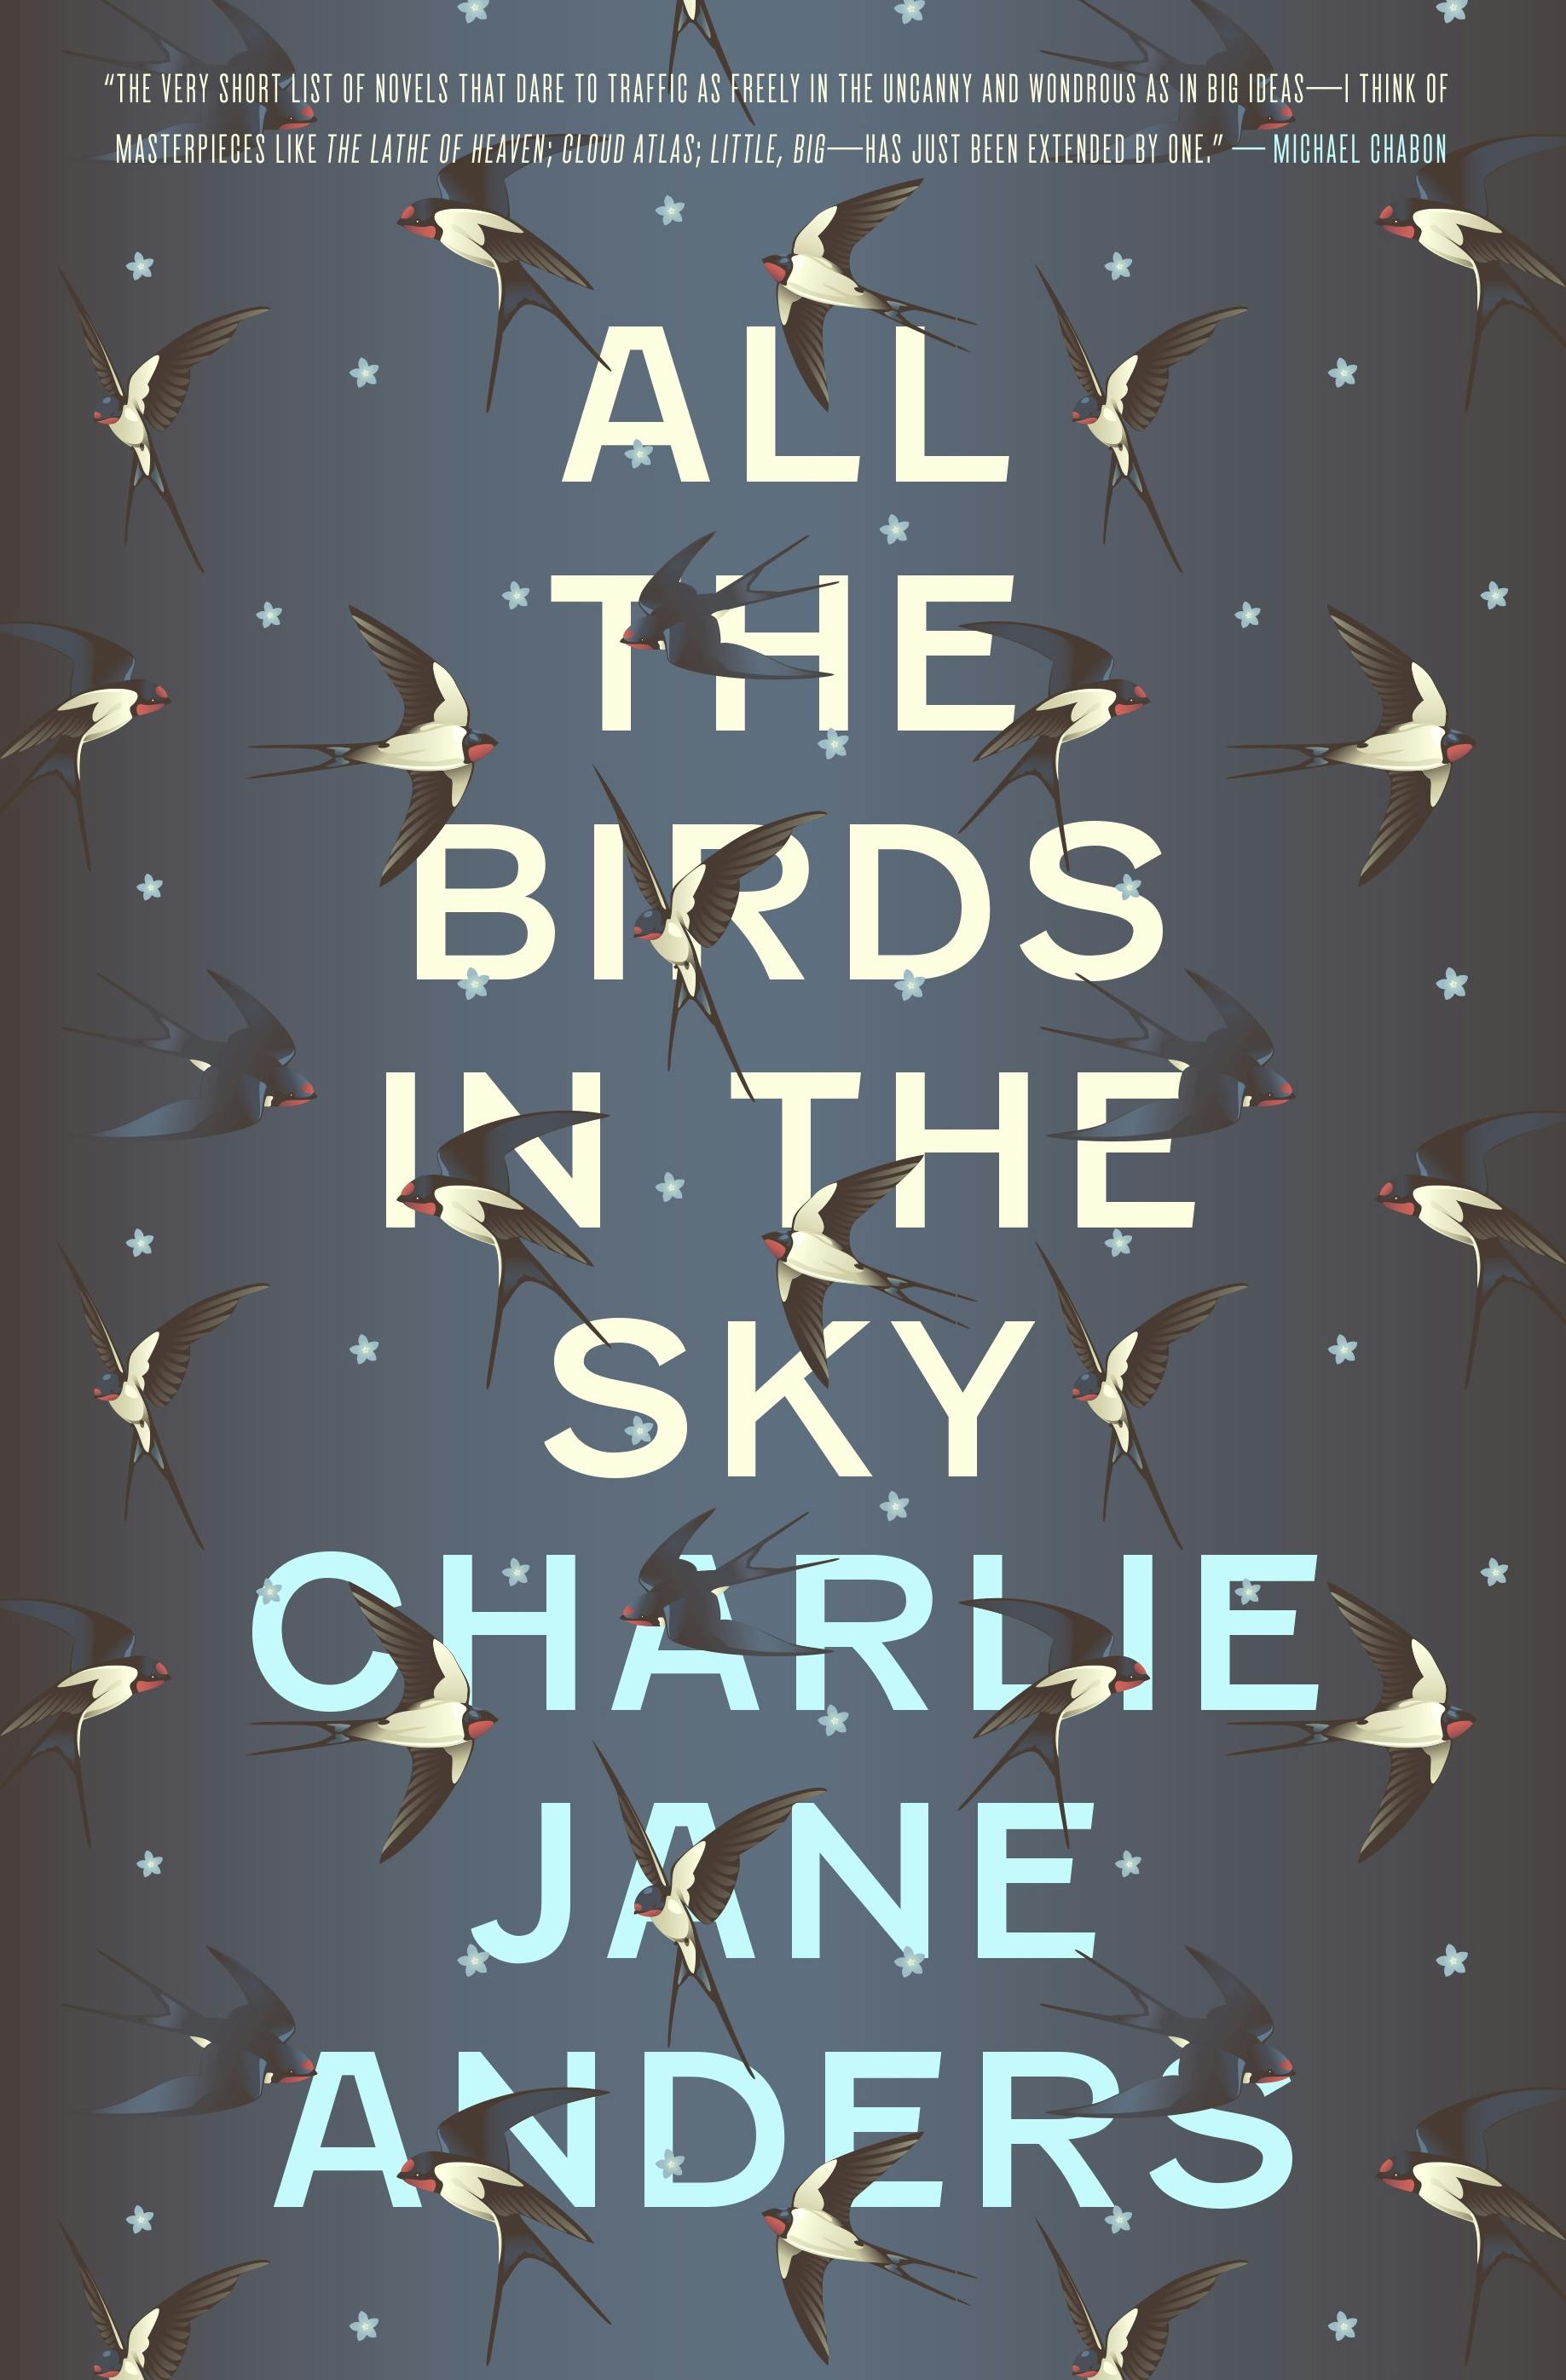 Cover for the book titled as: All the Birds in the Sky